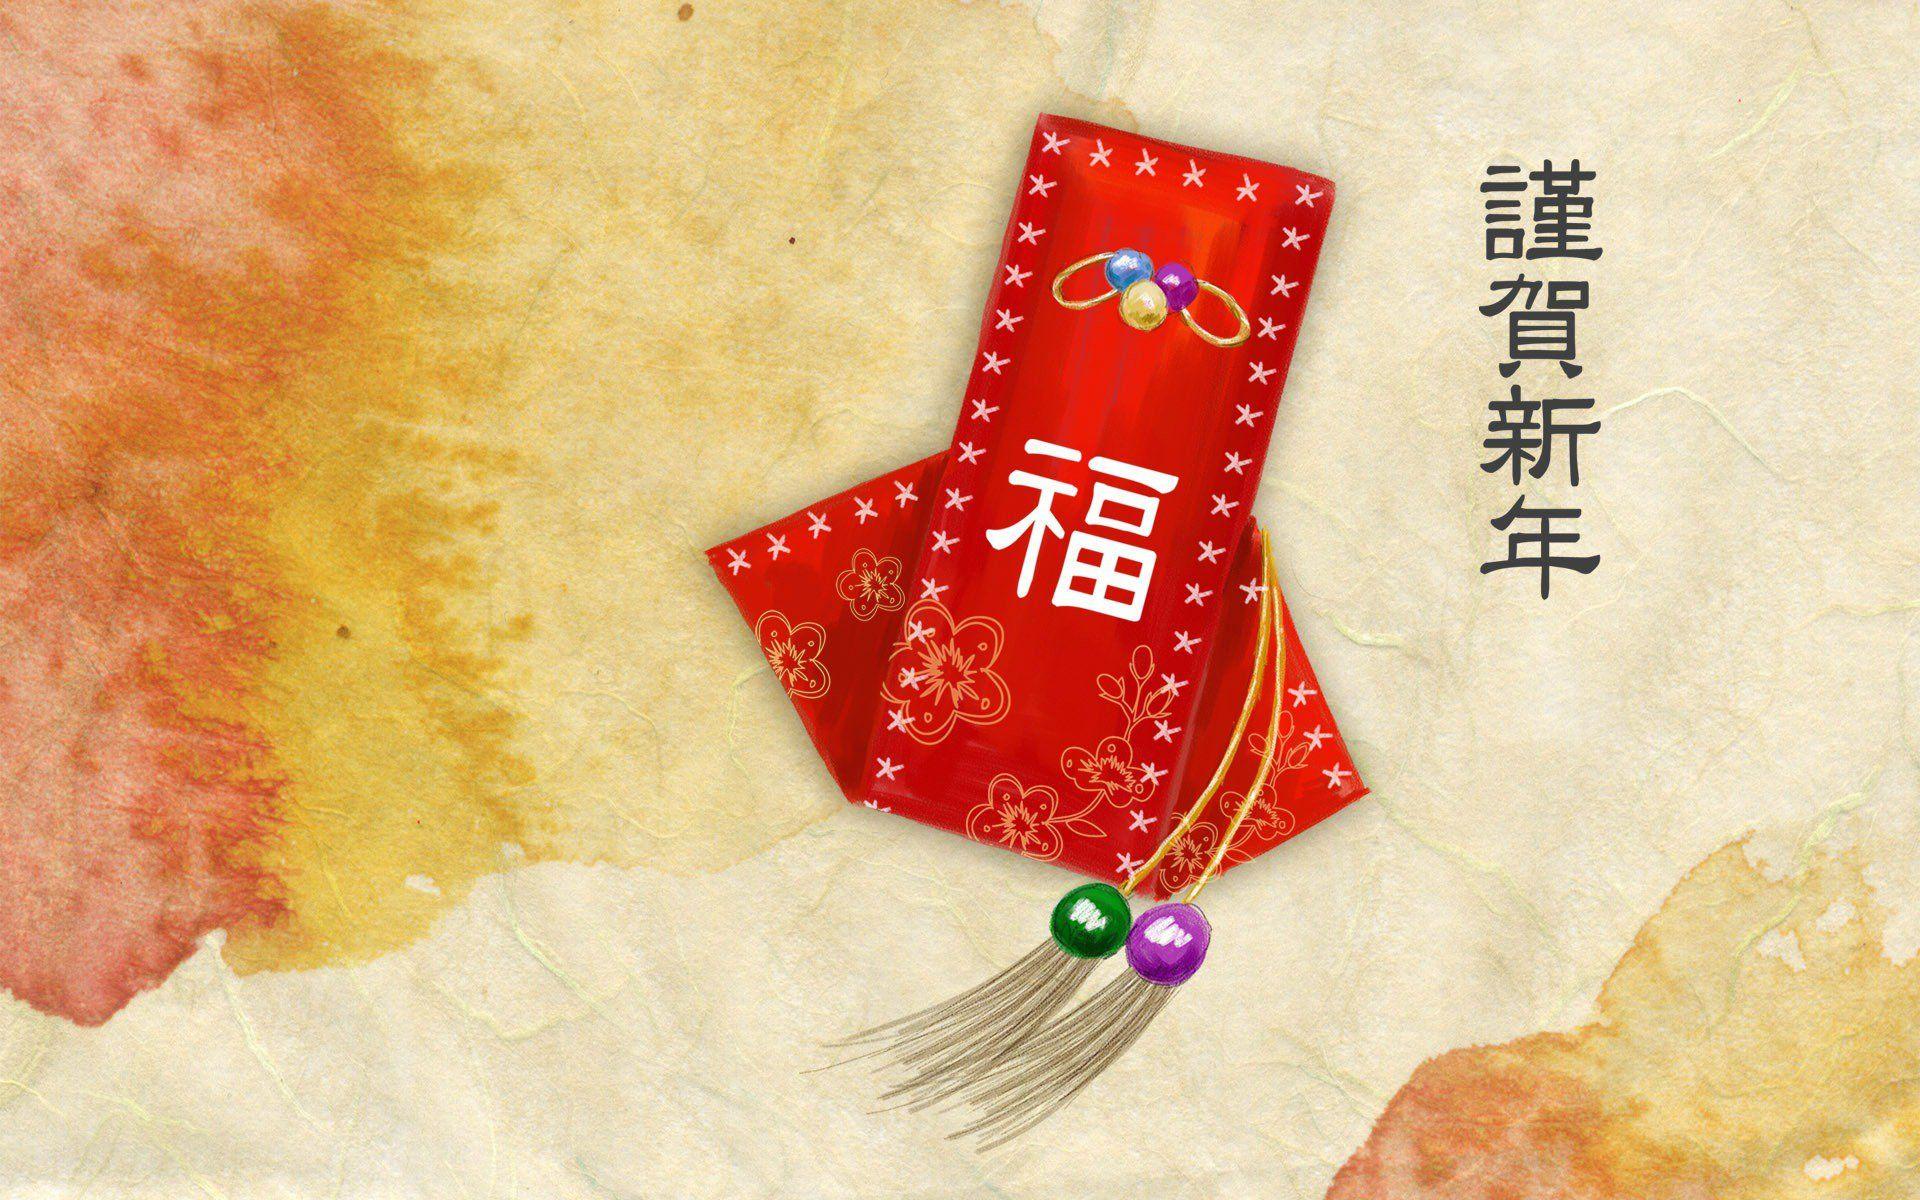 Chinese New Year Gallery 2015 Wallpaper Wallpaper. High